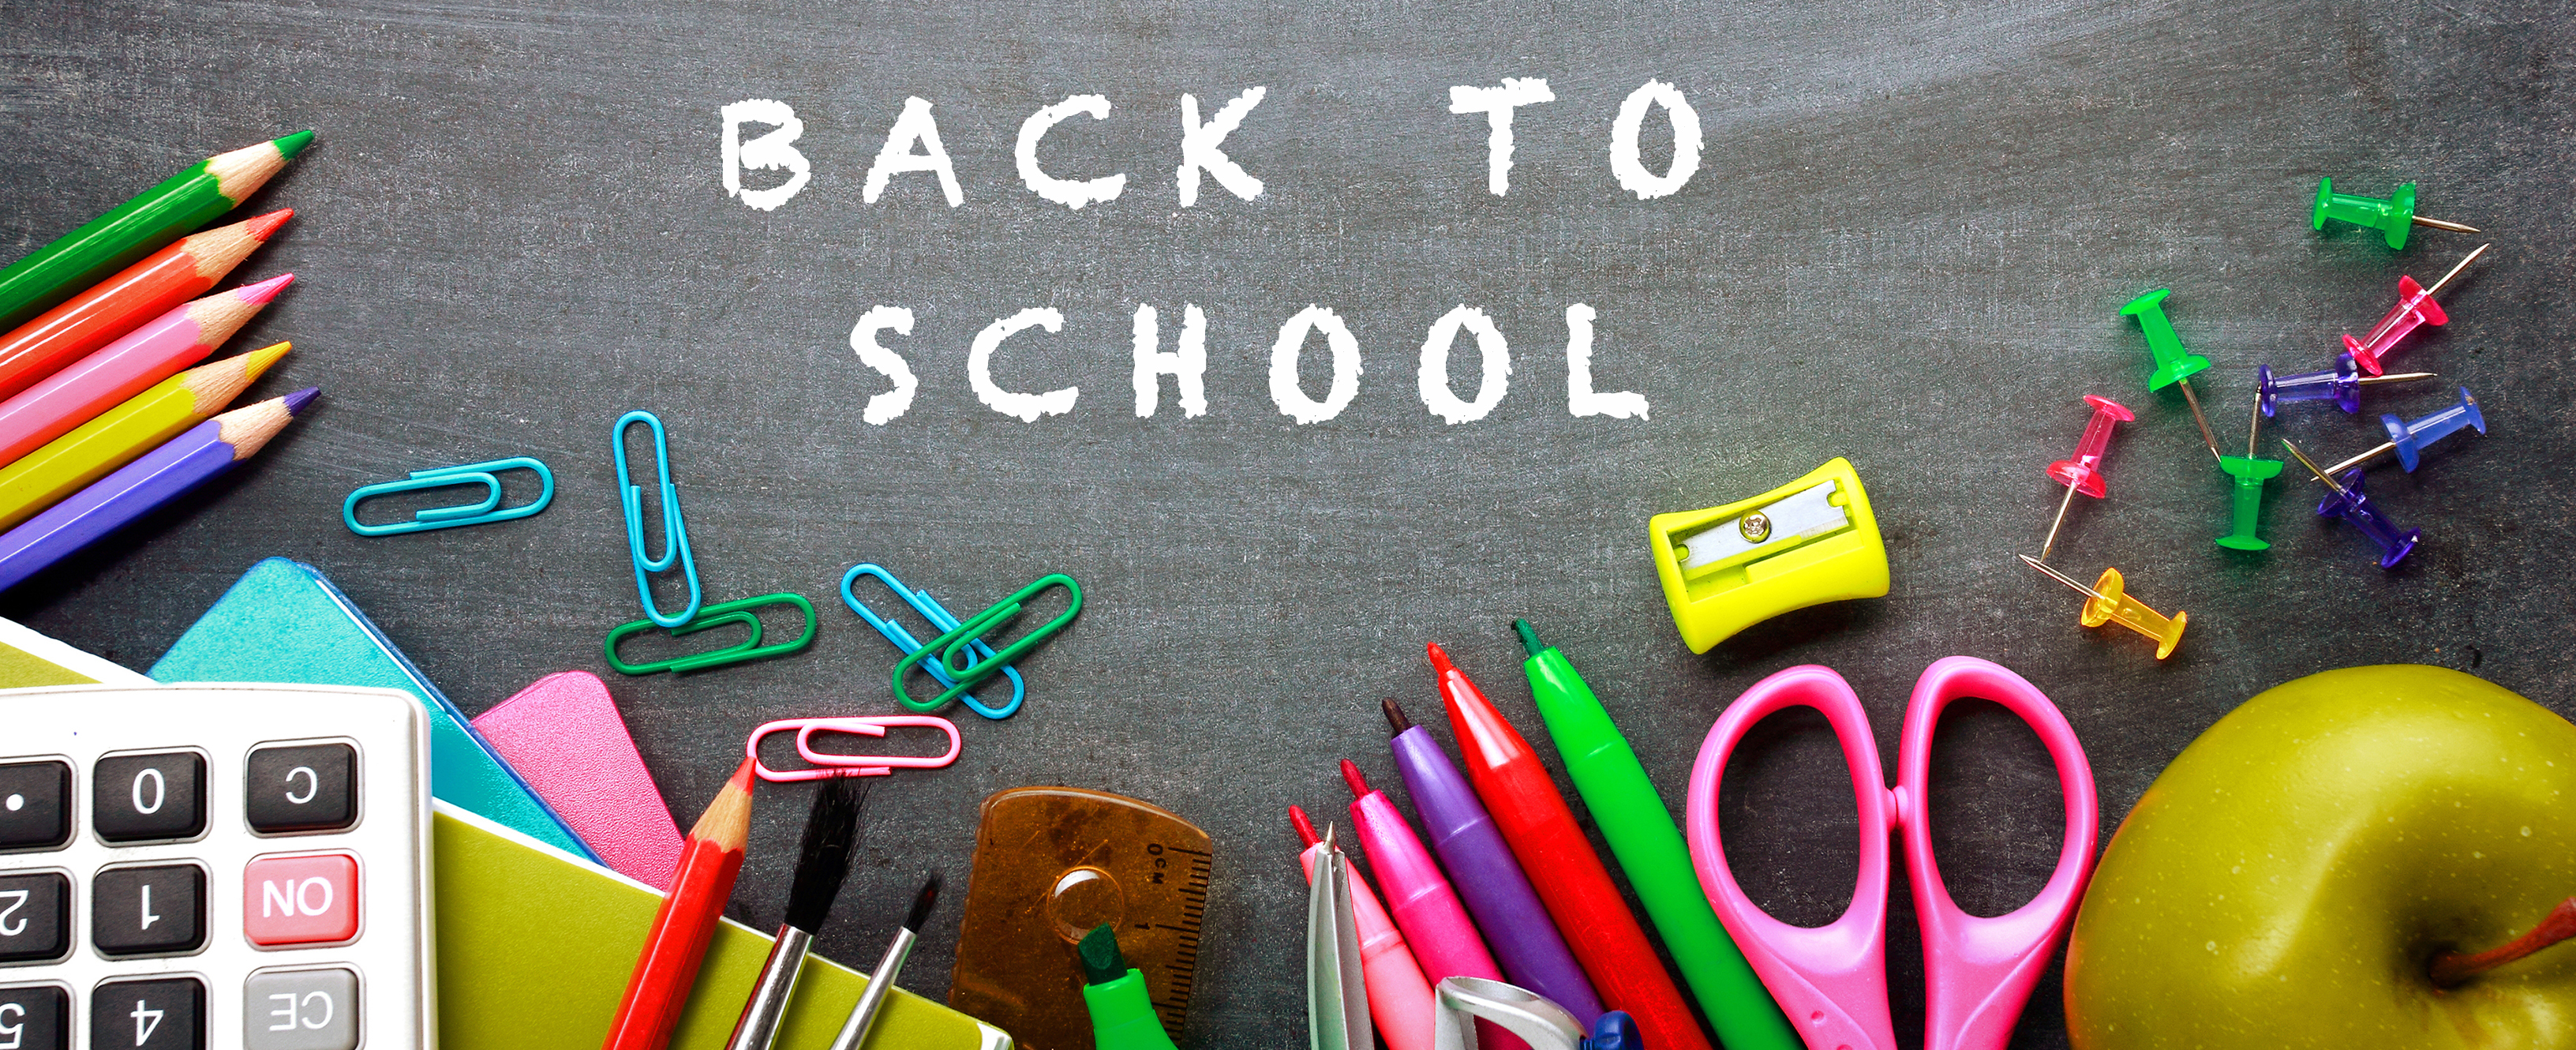 Awesome Back To School Education Wallpaper HD #1082 Wallpaper ...